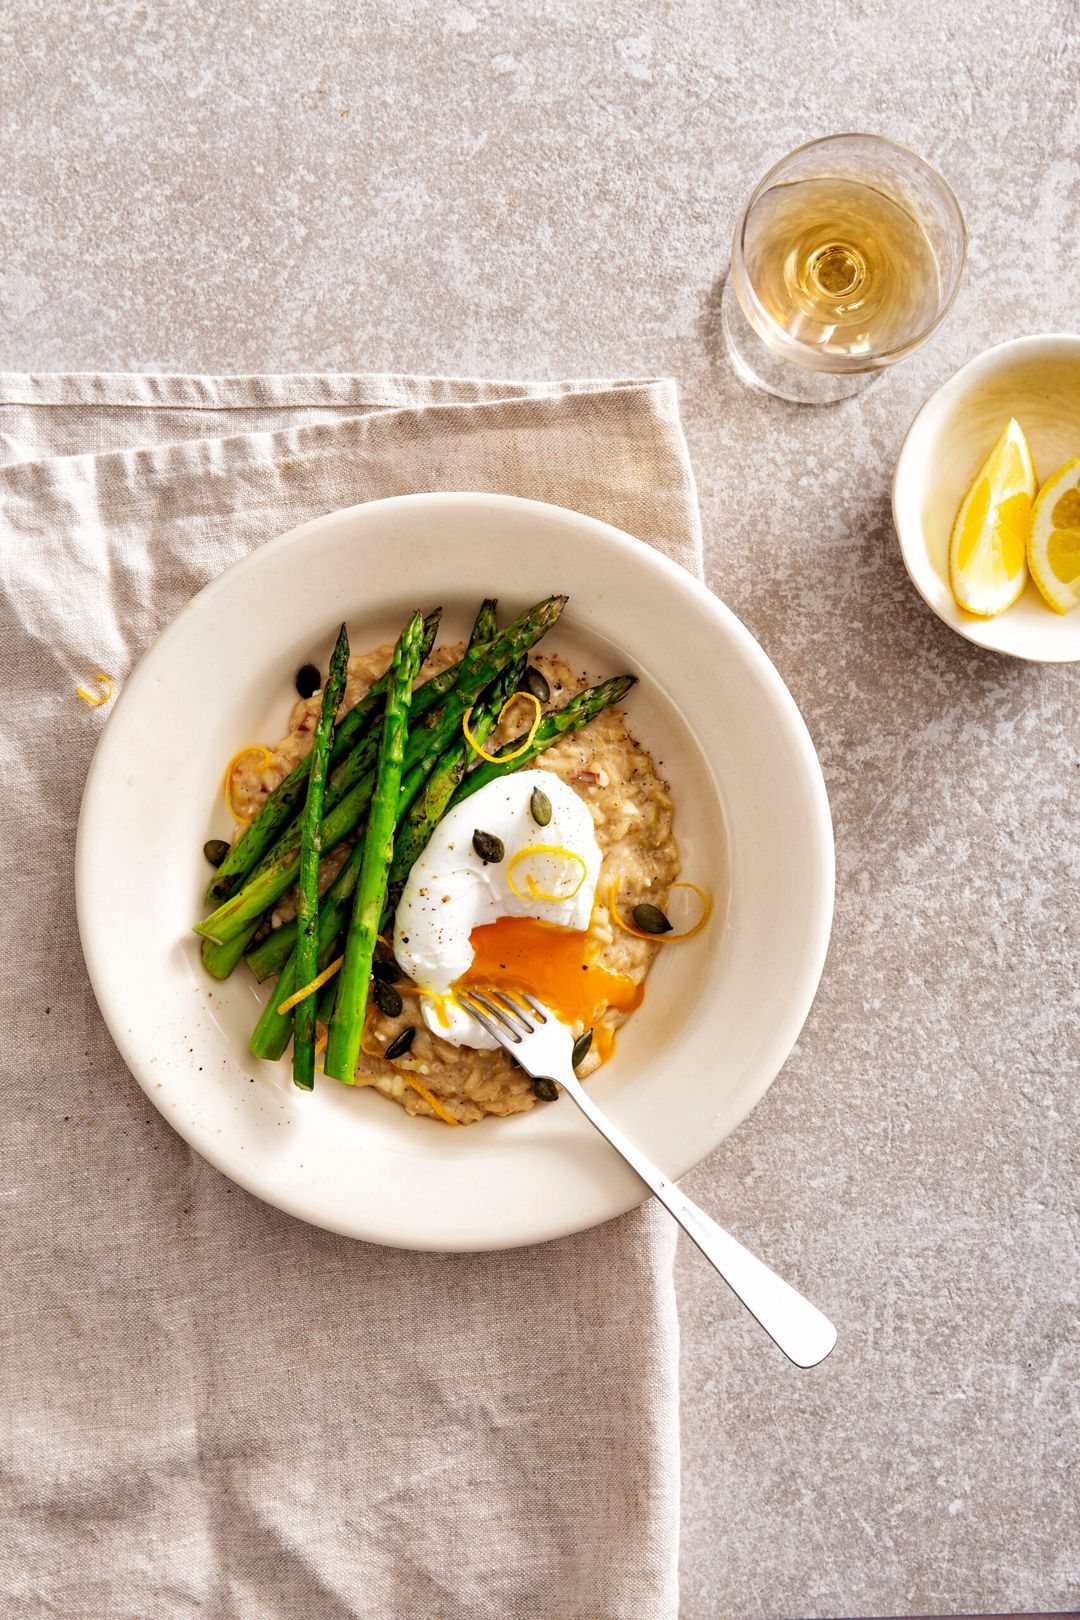 Lemon risotto with green asparagus and poached egg